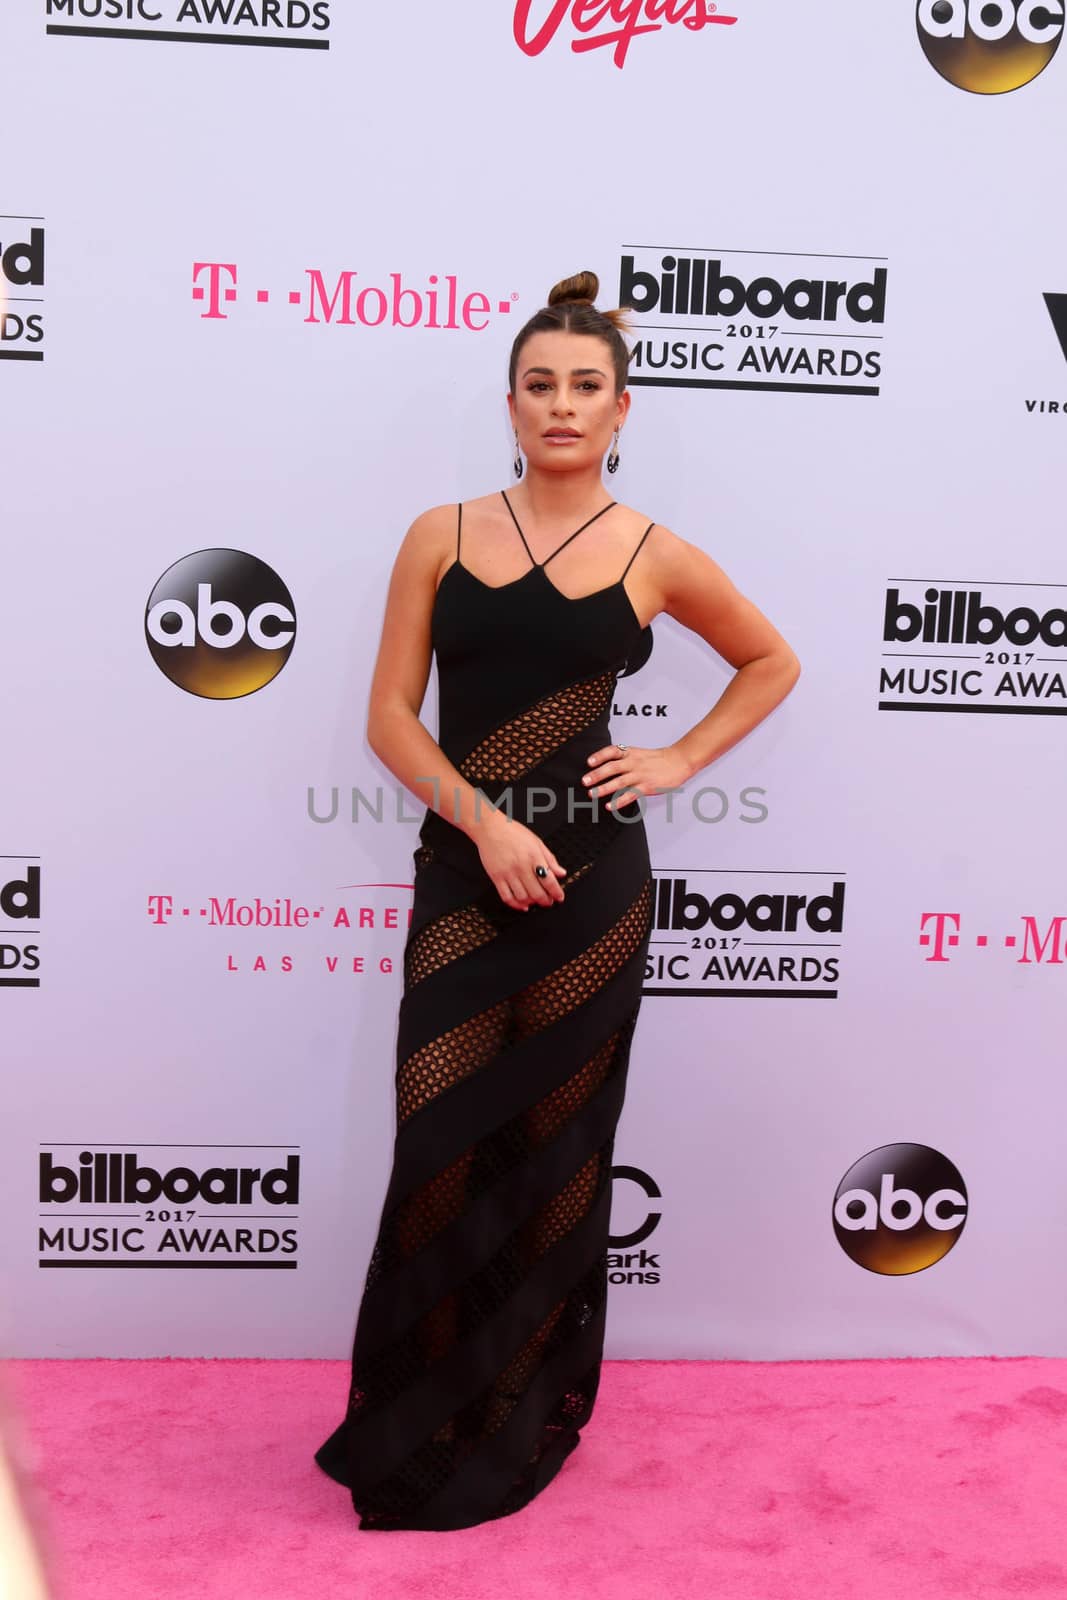 Lea Michele
at the 2017 Billboard Awards Arrivals, T-Mobile Arena, Las Vegas, NV 05-21-17/ImageCollect by ImageCollect